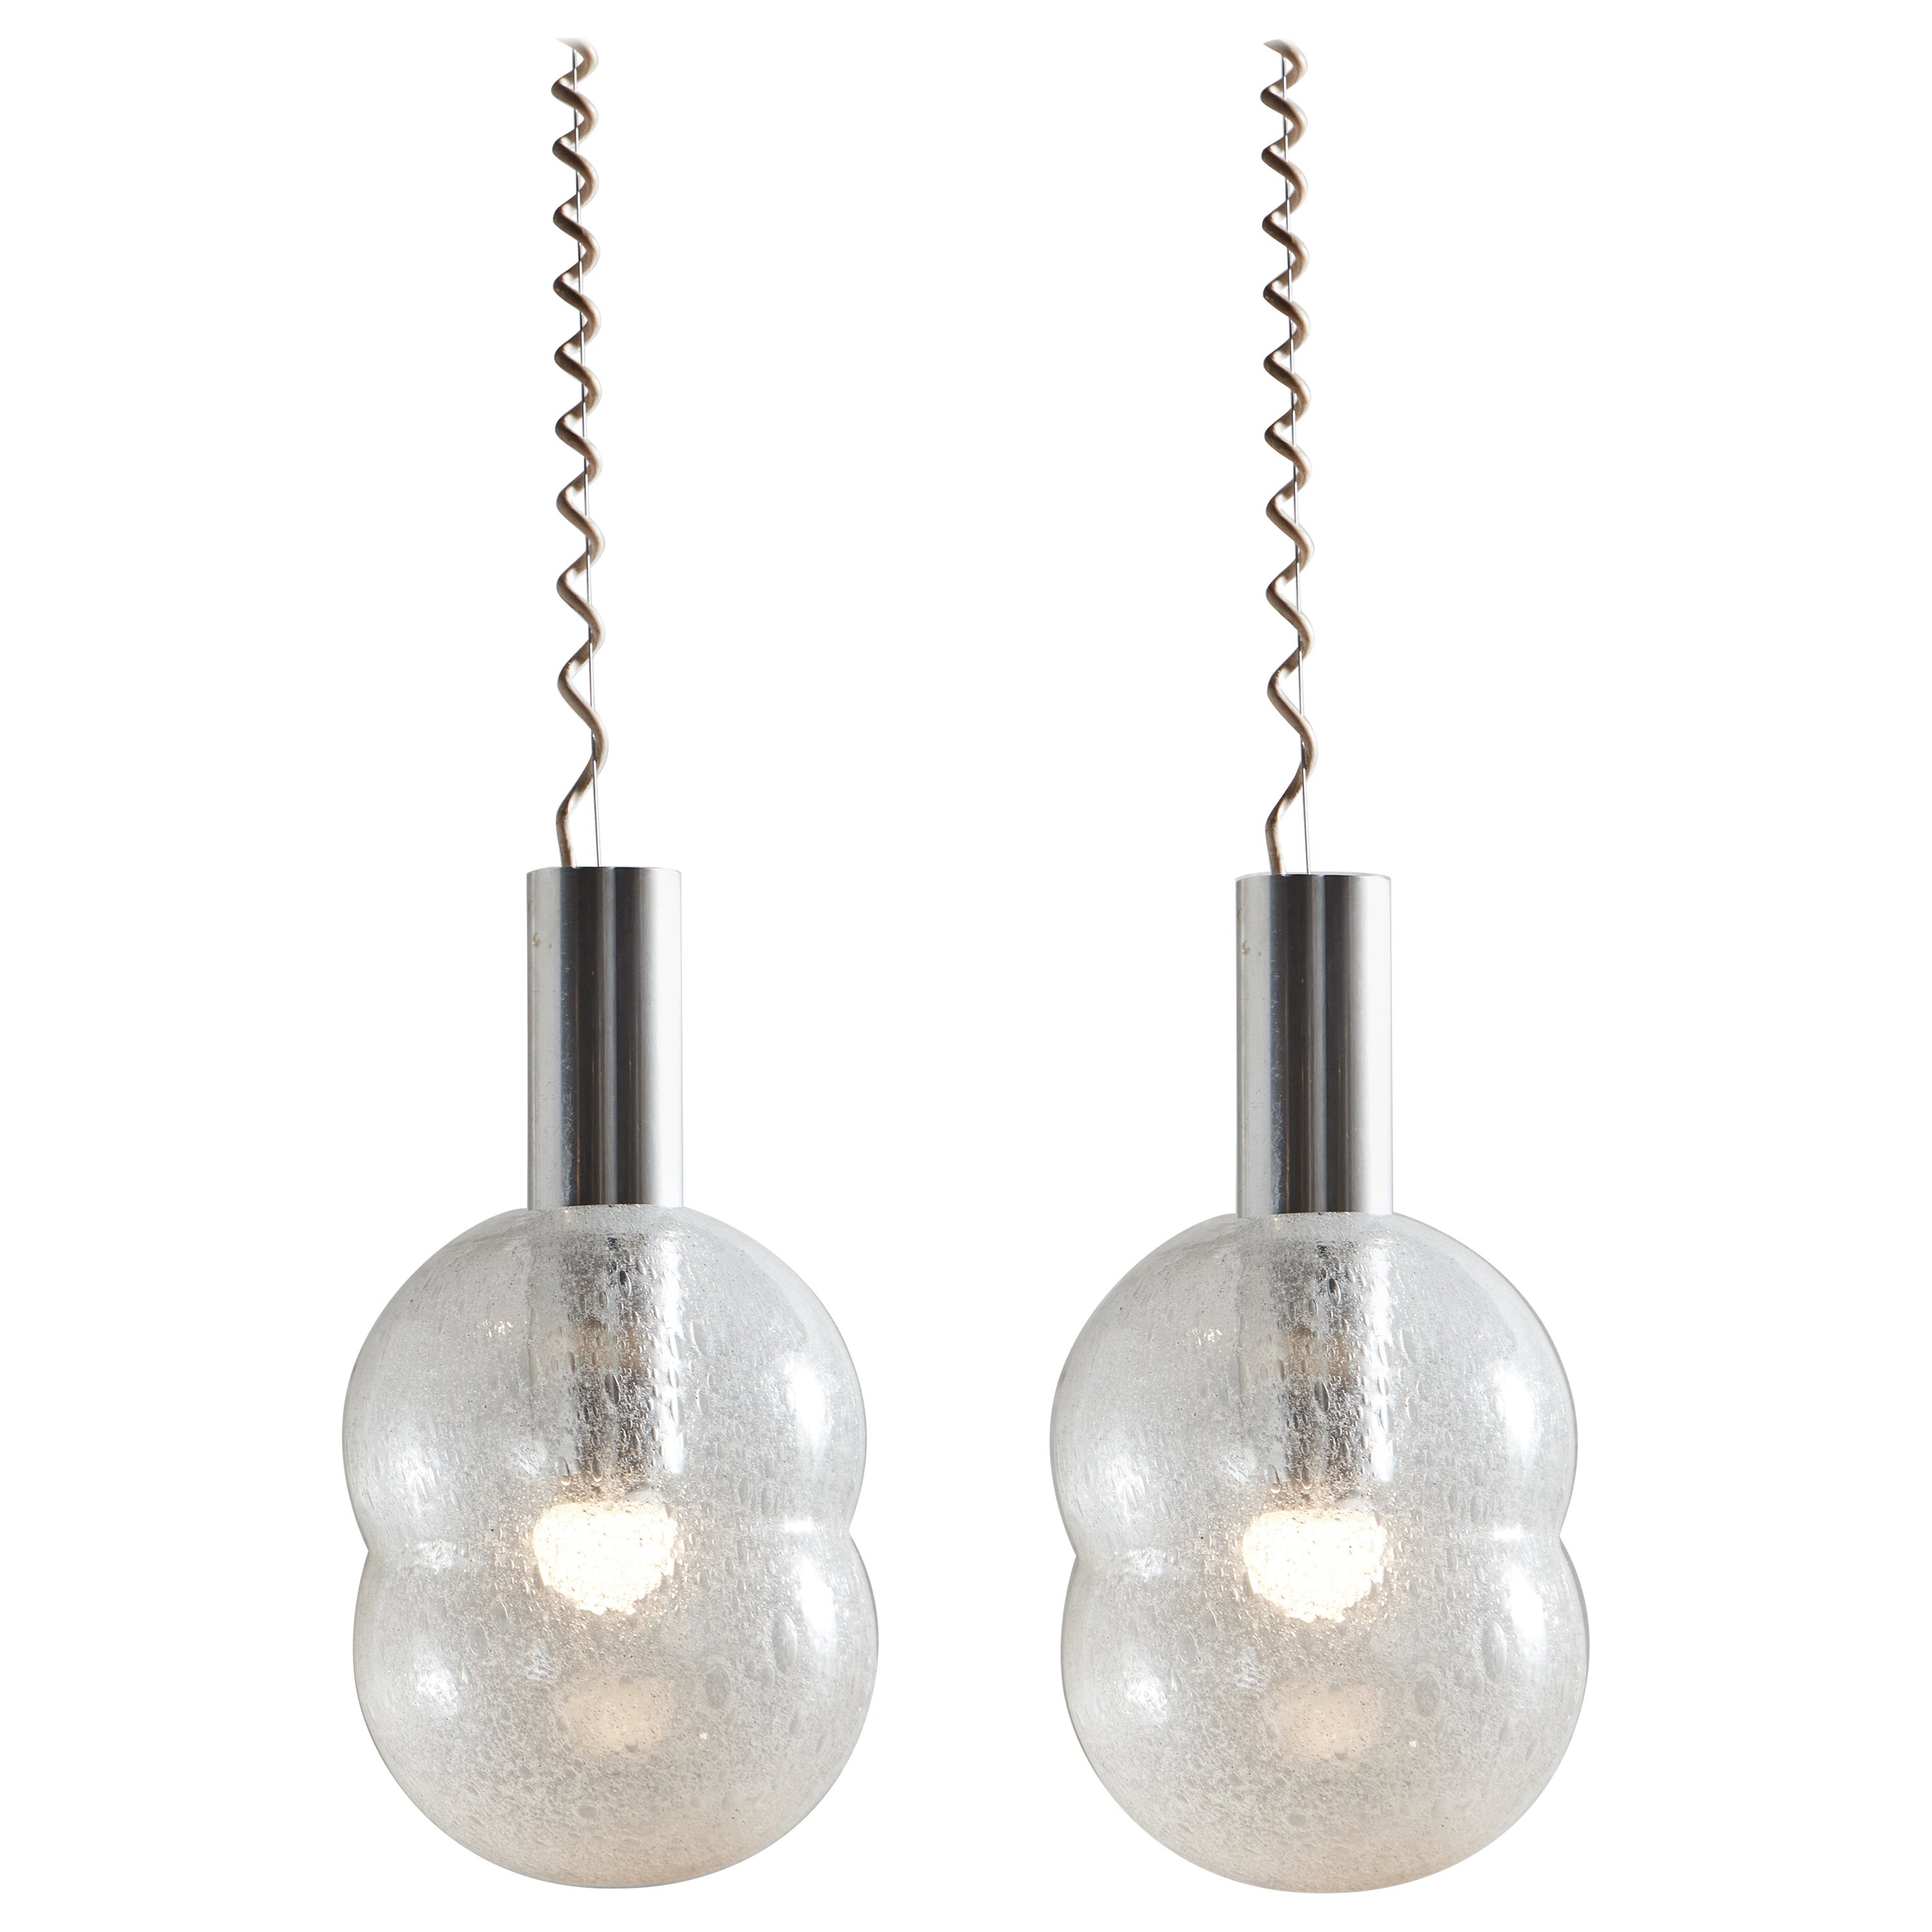 Pair of ‘Bilobo’ Pendant Lights by Tobia Scarpa for Flos, Italy 1960s For Sale